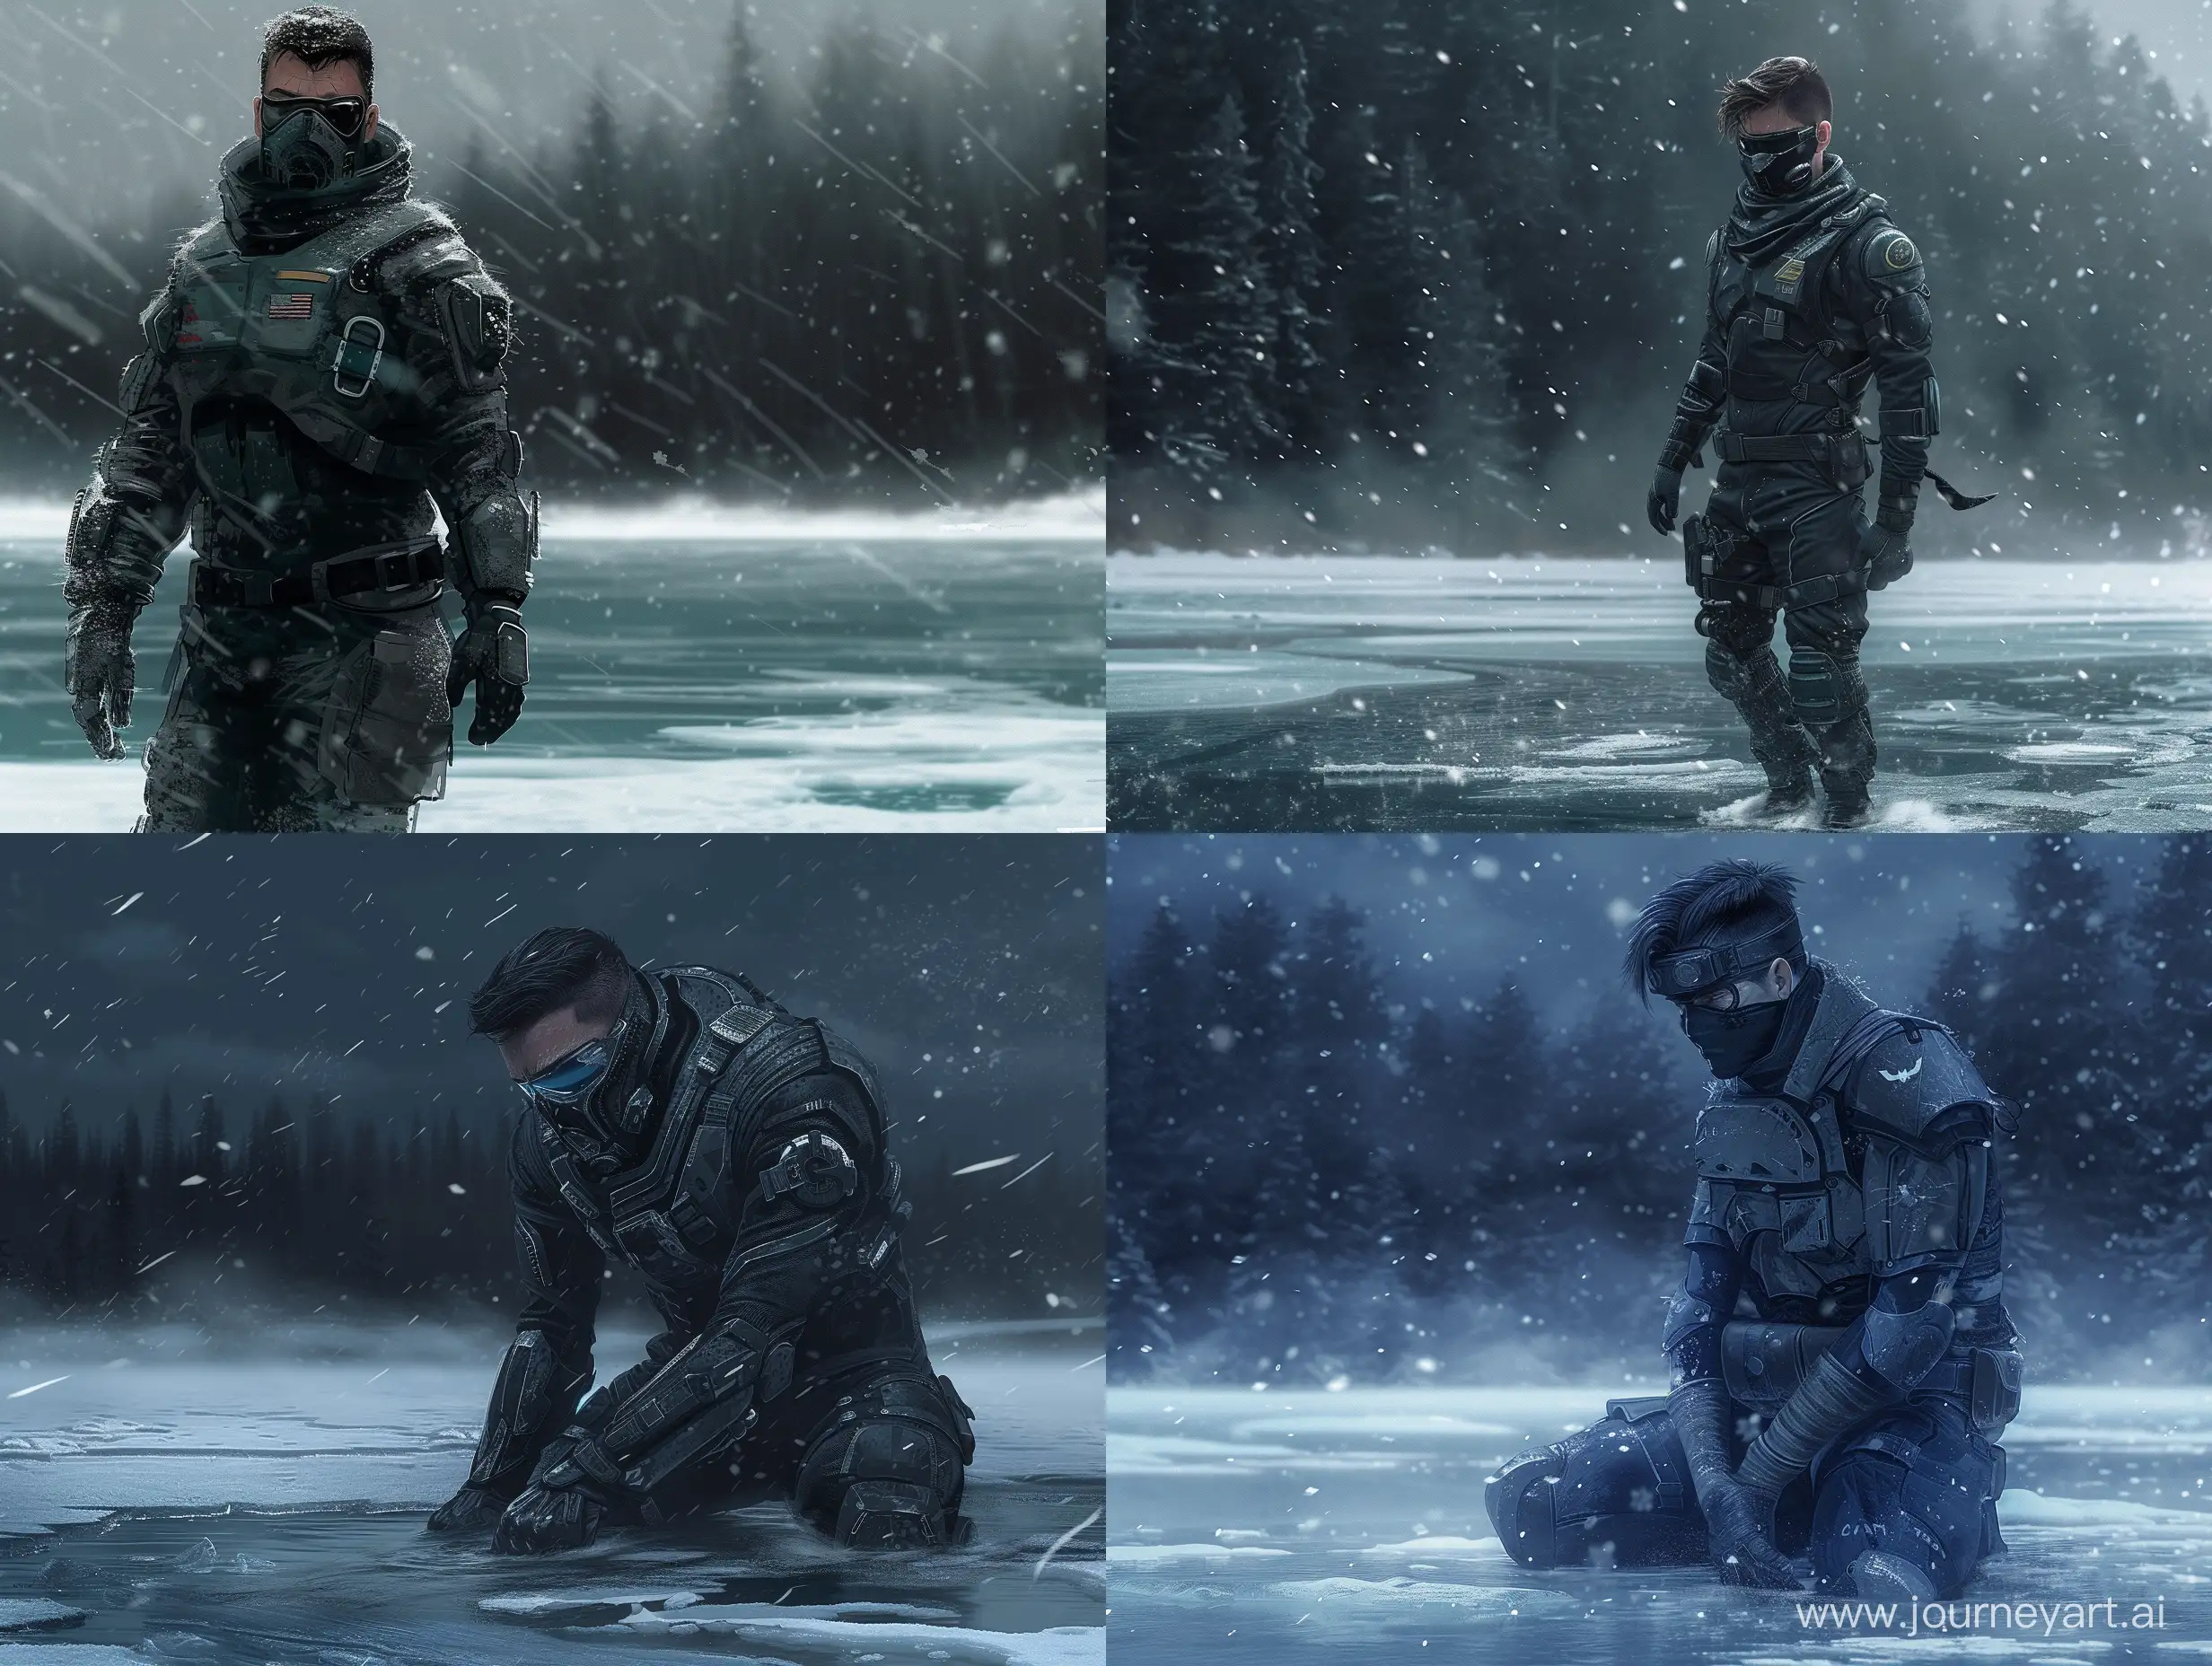 concept art, male, sci fi dark hunter uniform, half mask on face, on an icy lake, dark forest in the background, snowstorm